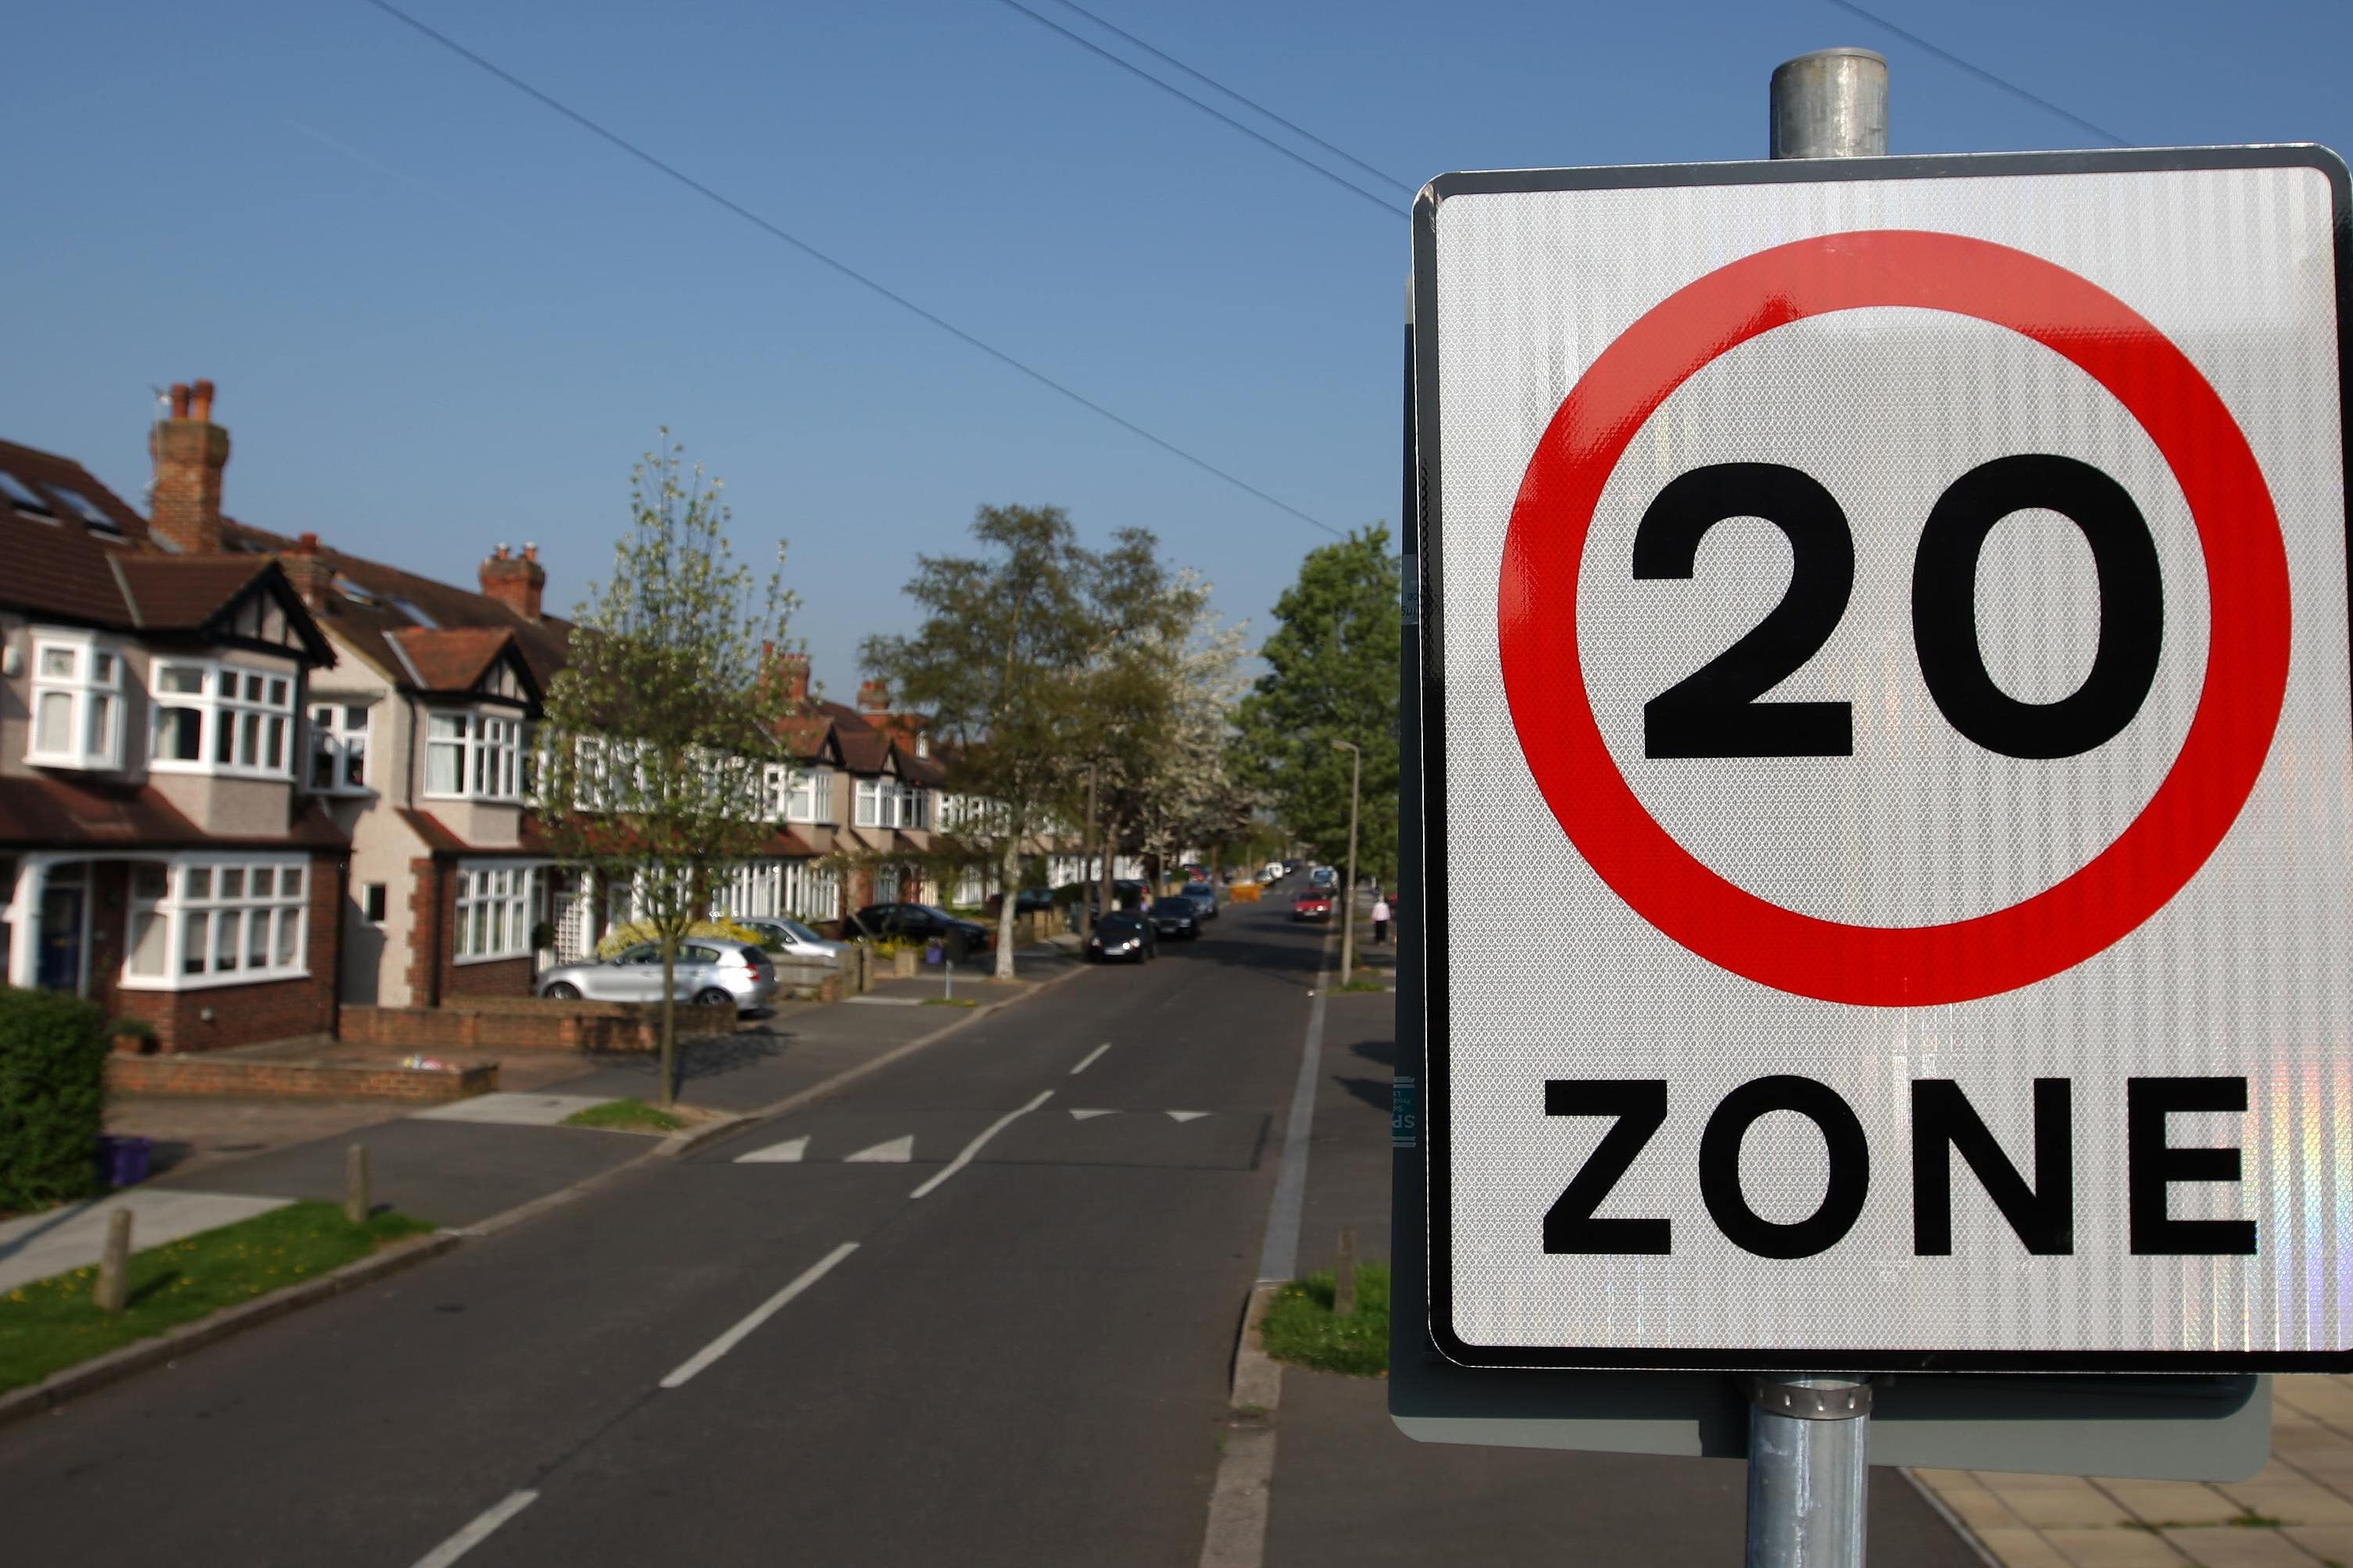 Any motorist caught driving over 20mph but under 30mph will initially receive advice from the police rather than face a ticket, a minister said